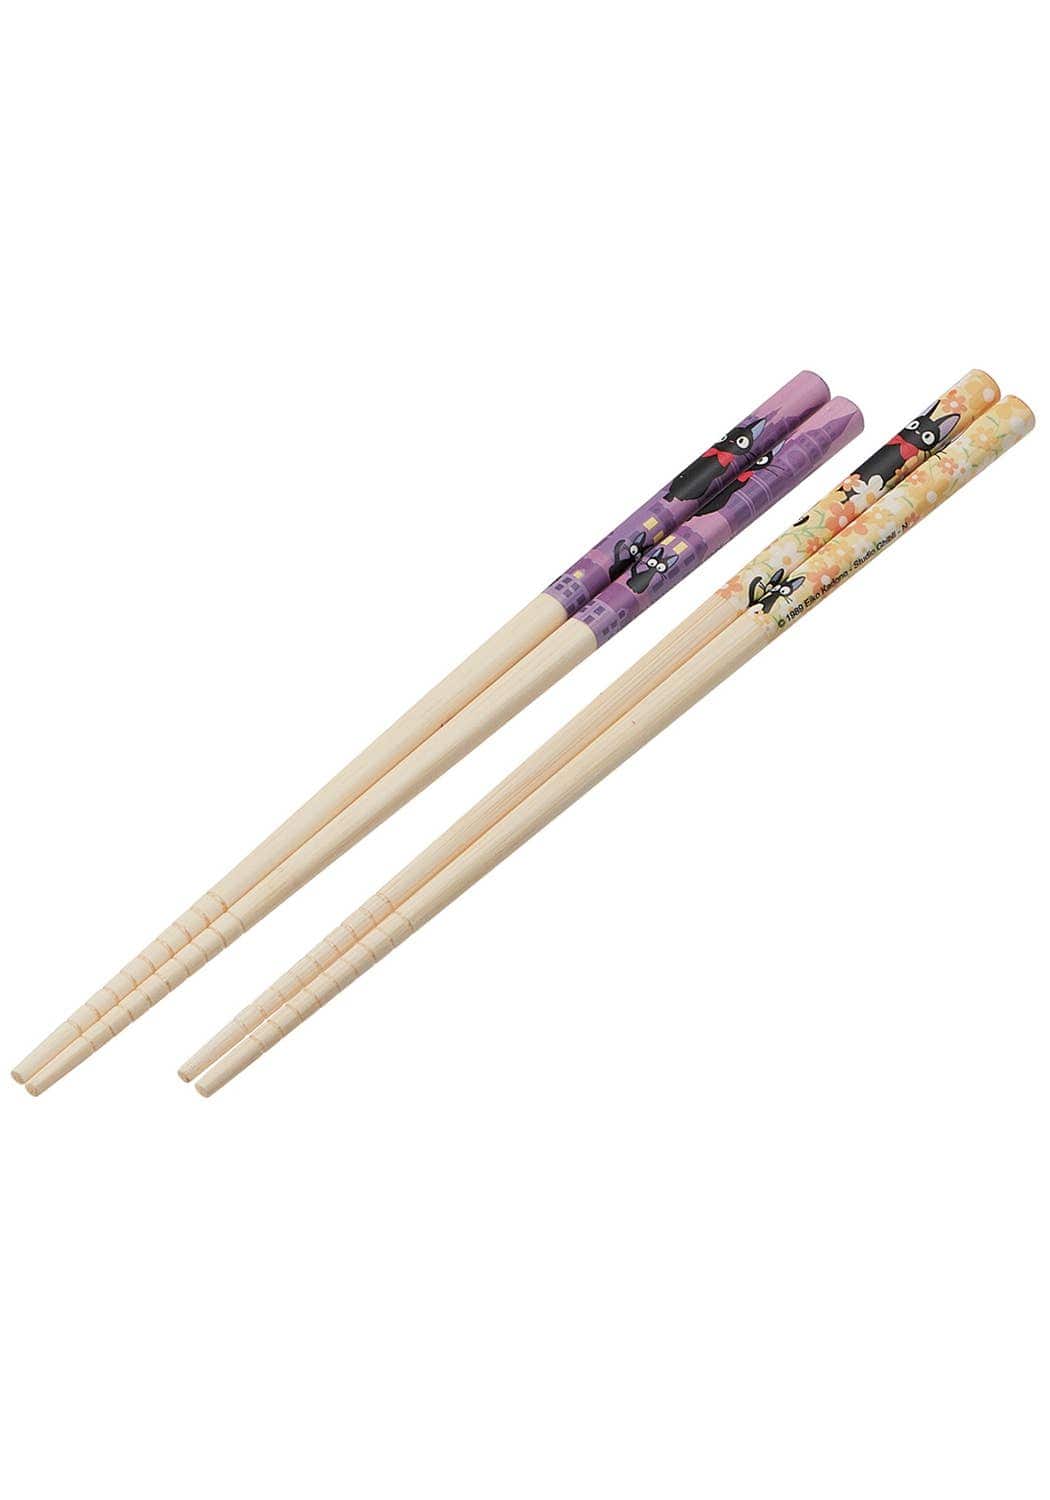 Clever Idiots Kiki's Delivery Service Bamboo Chopstick 2-piece Set Kawaii Gifts 4973307470691